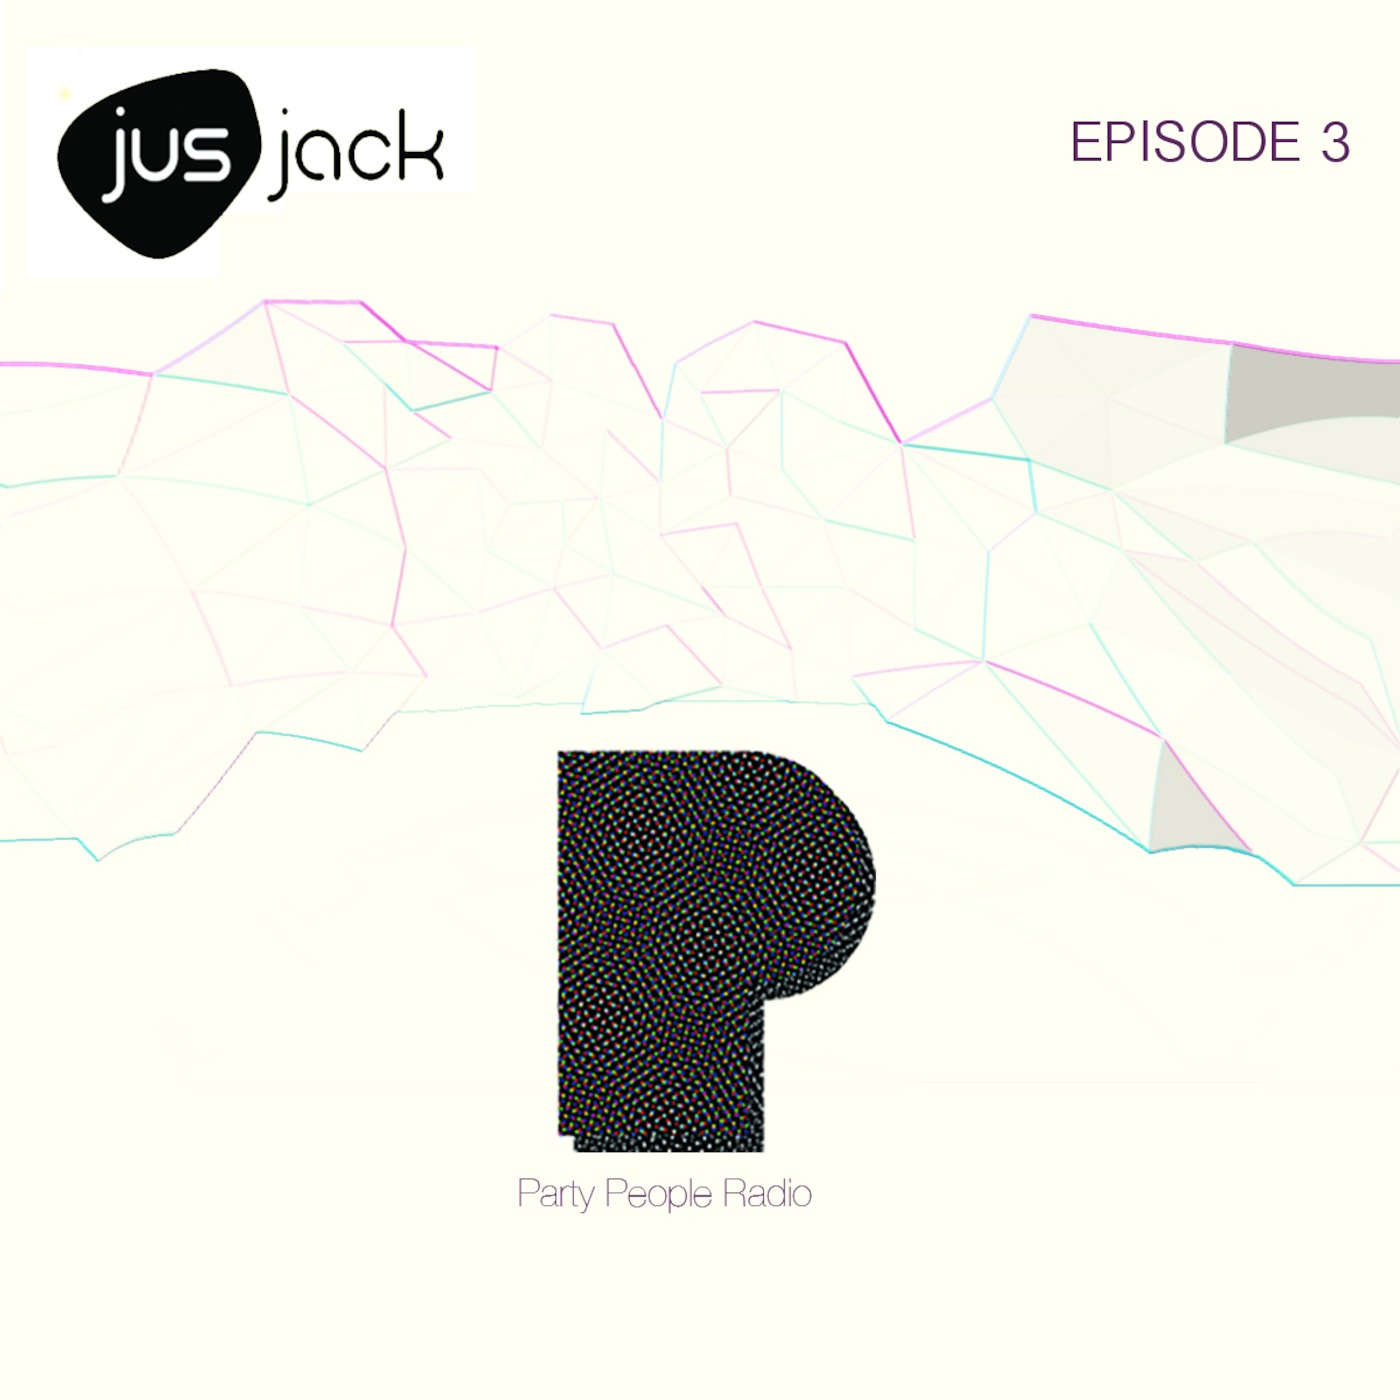 Party People Radio by Jus Jack Episode 3